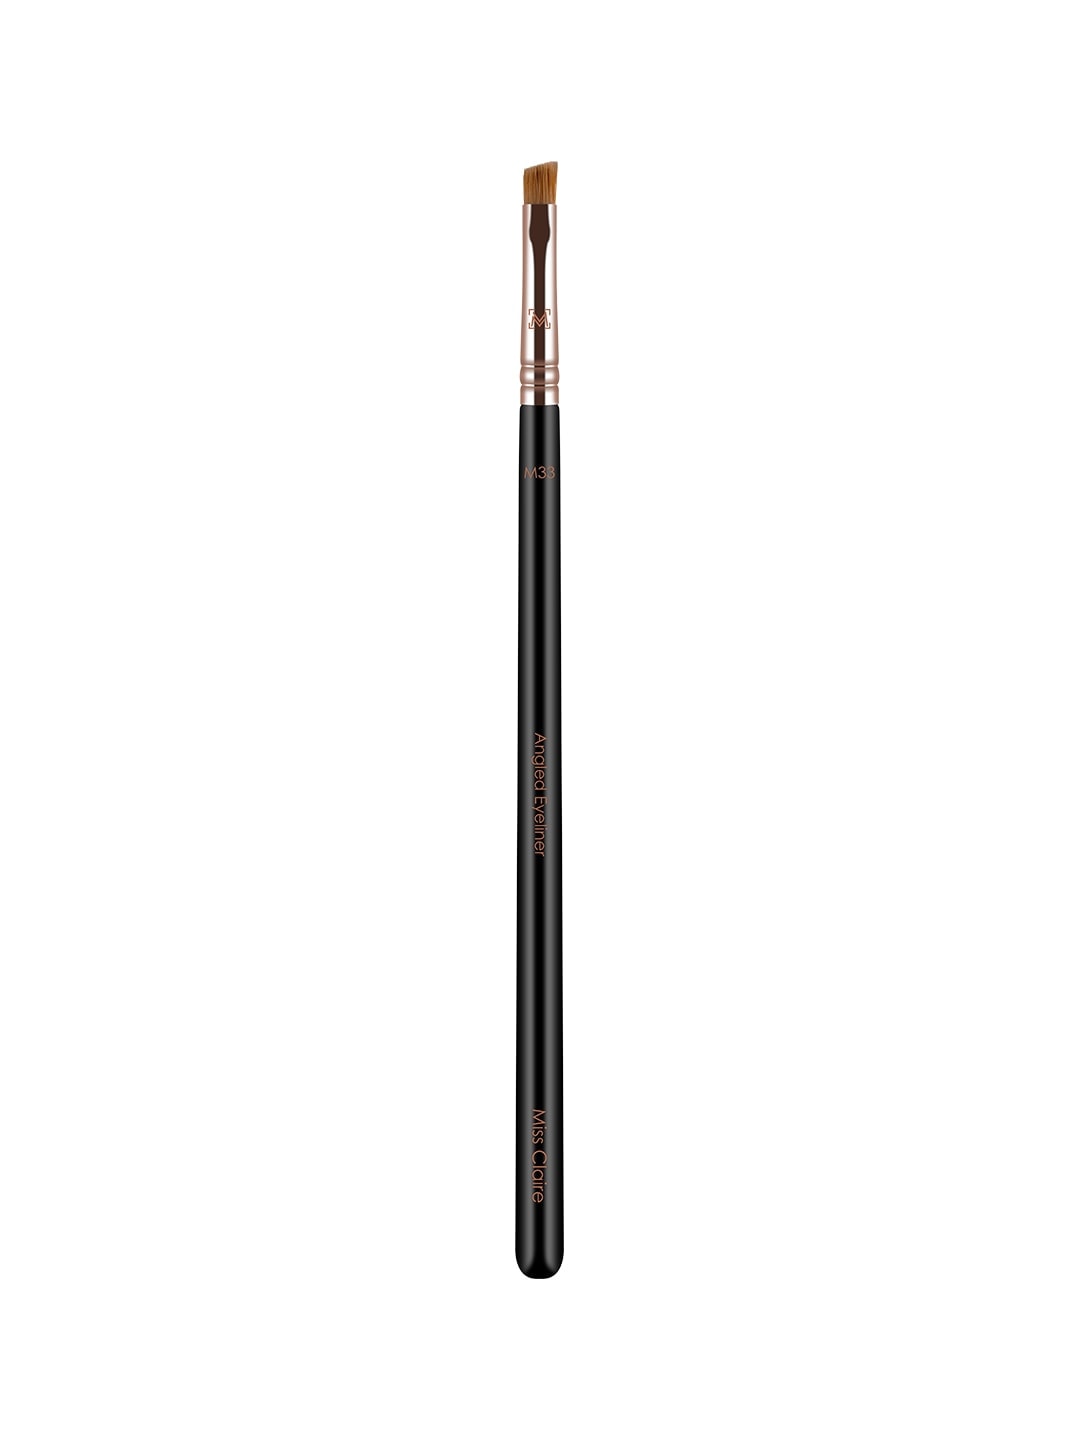 Miss Claire M33 - Angled Eyeliner Brush - S - Rose Gold-Toned & Black Price in India